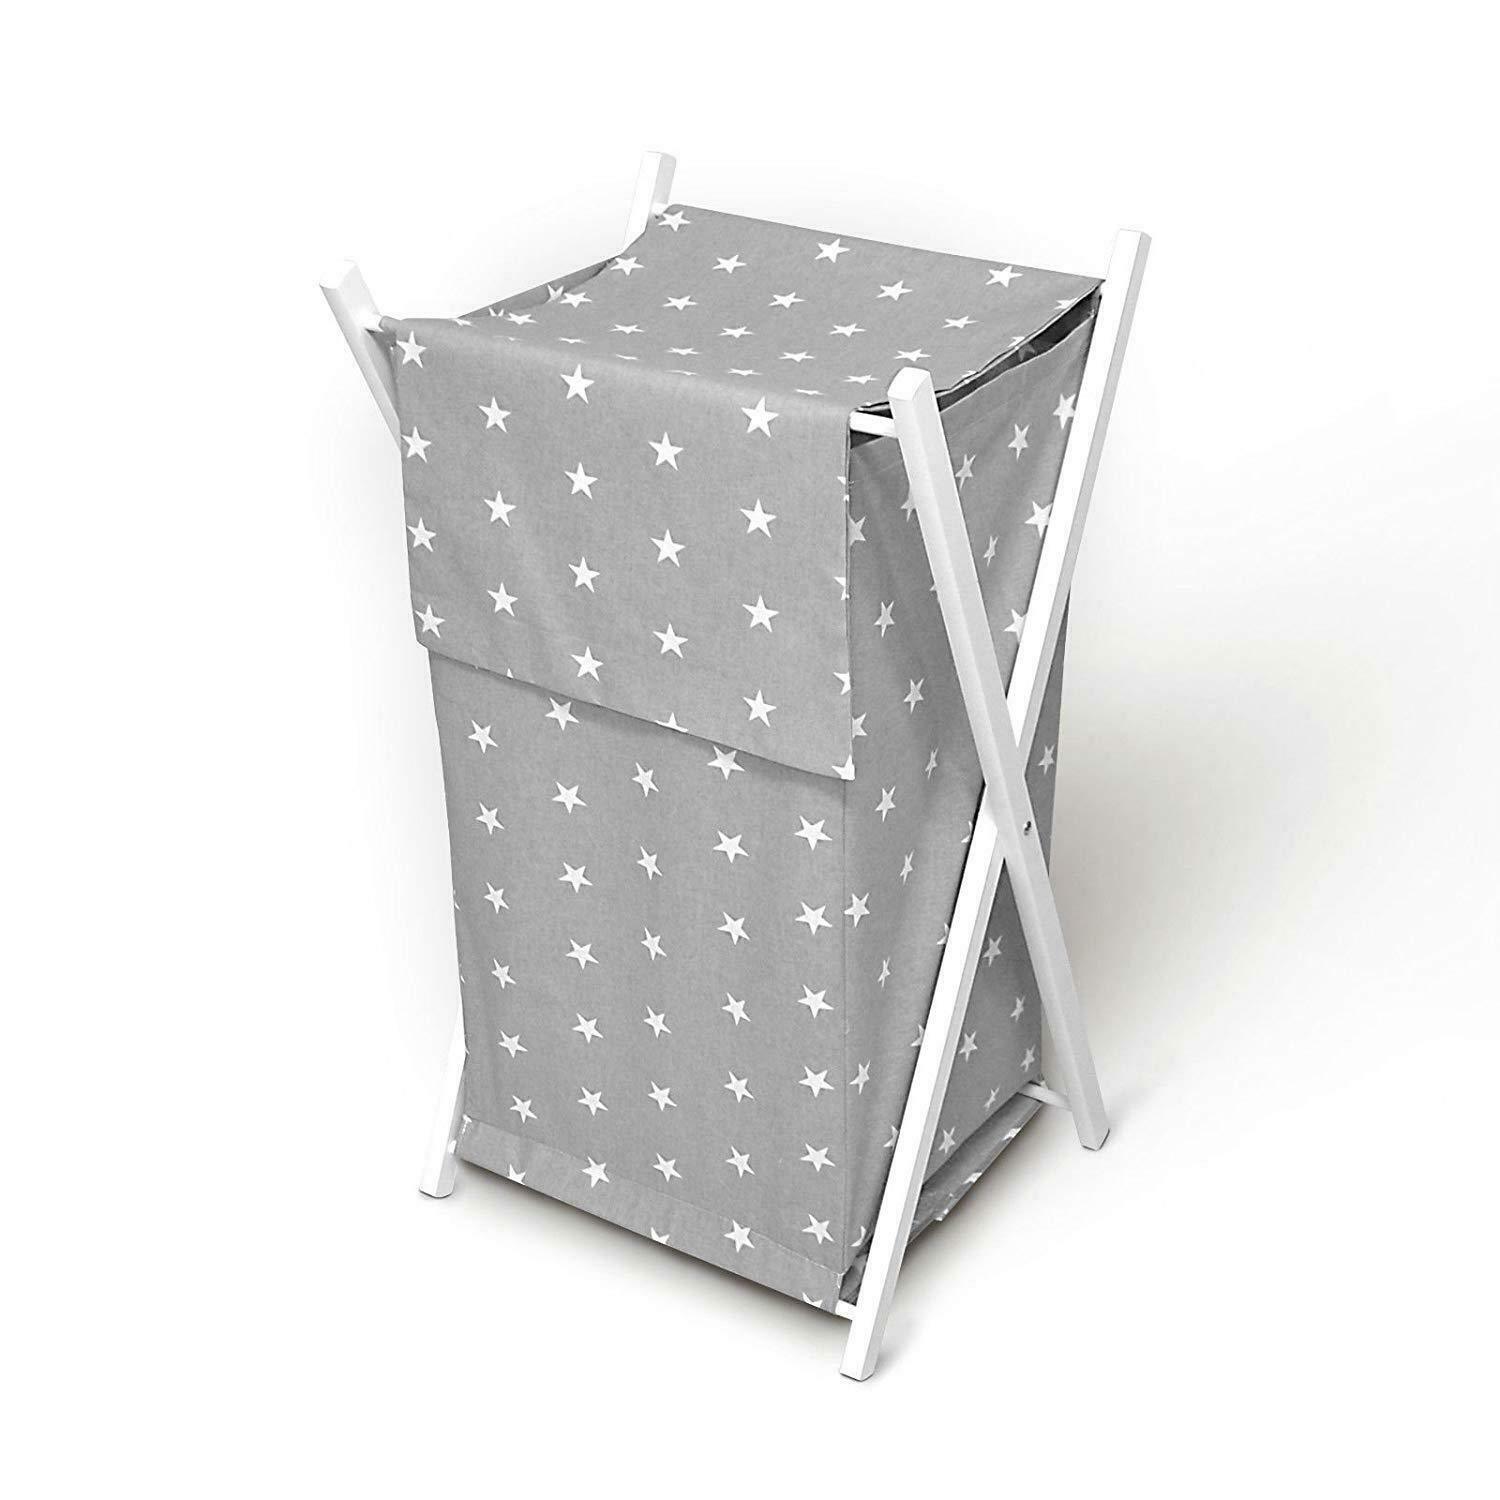 Laundry Basket with white wooden frame and storage removable linen SMALL WHITE STARS ON GREY